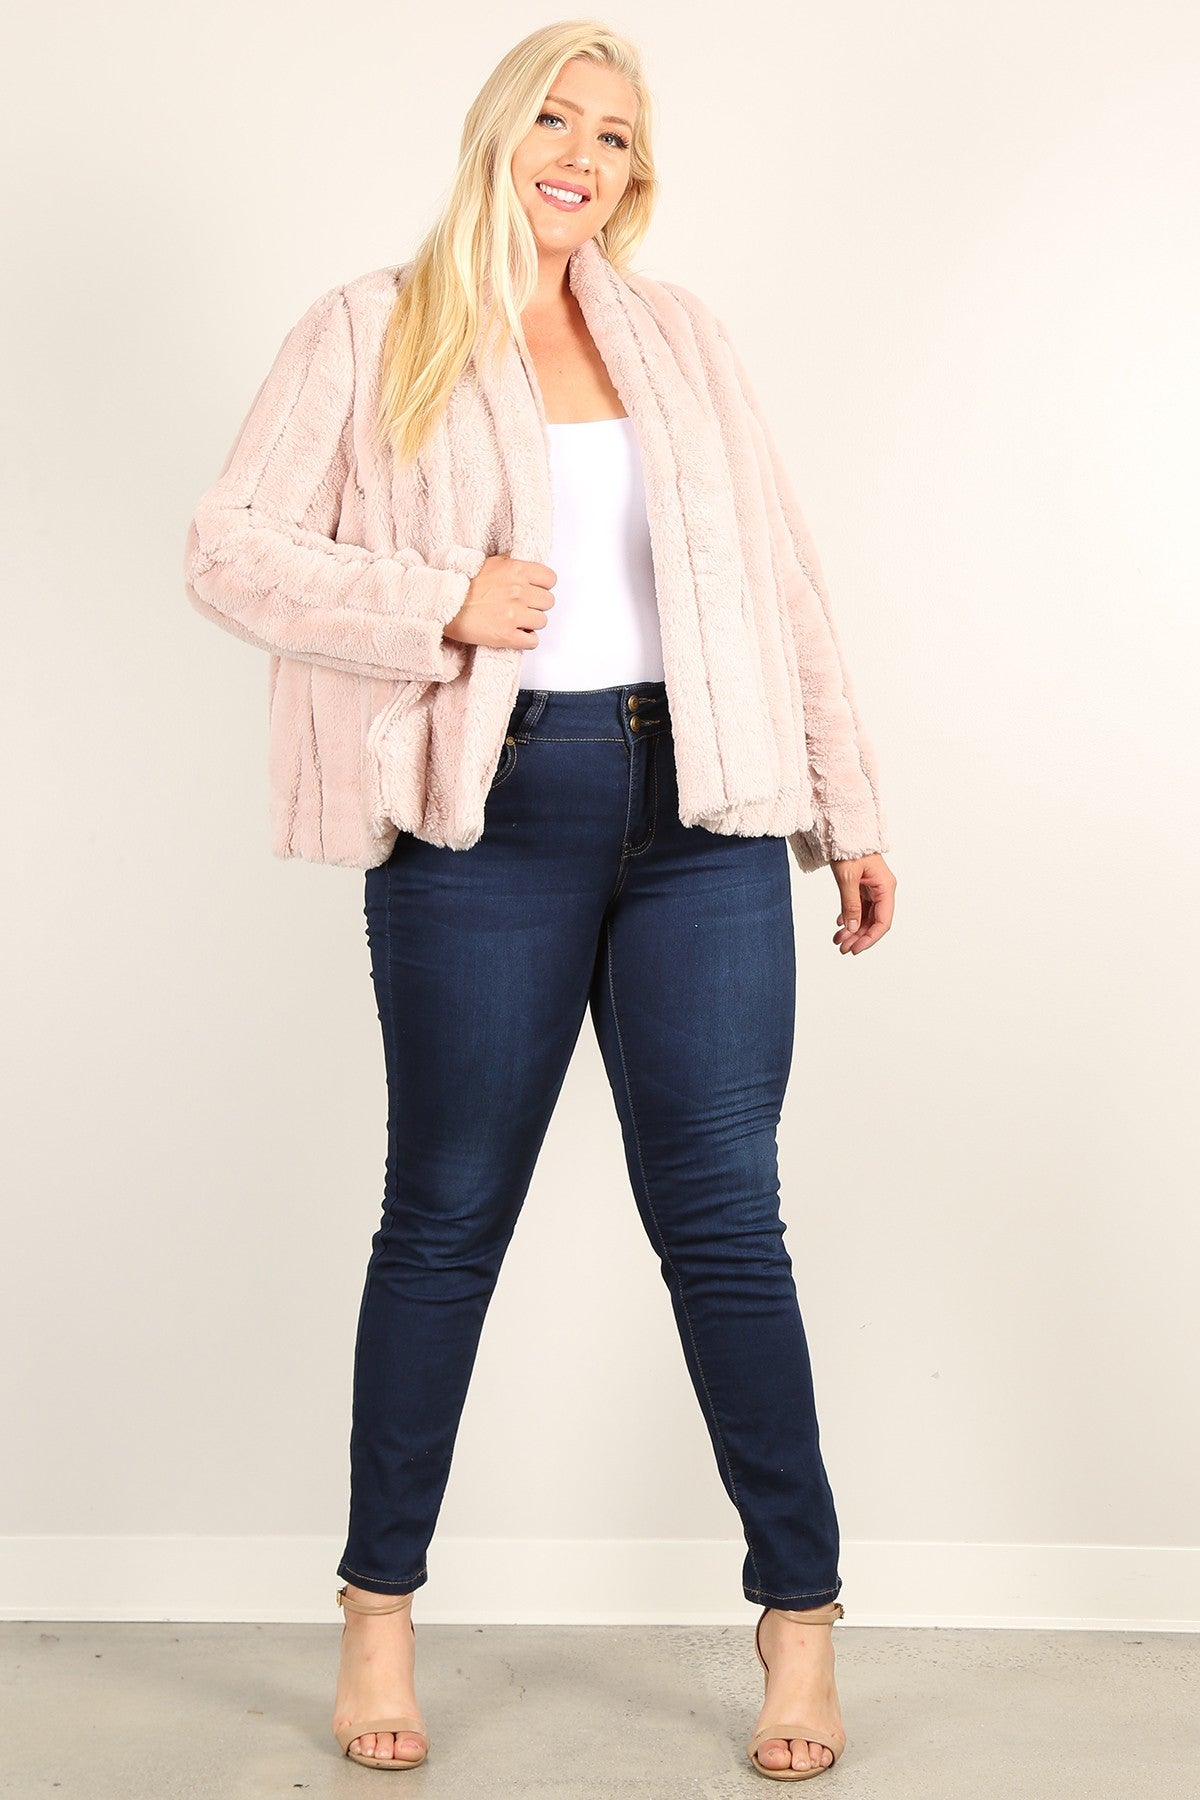 THE JESS Plus Size Faux Fur Jackets With Open Front And Loose Fit